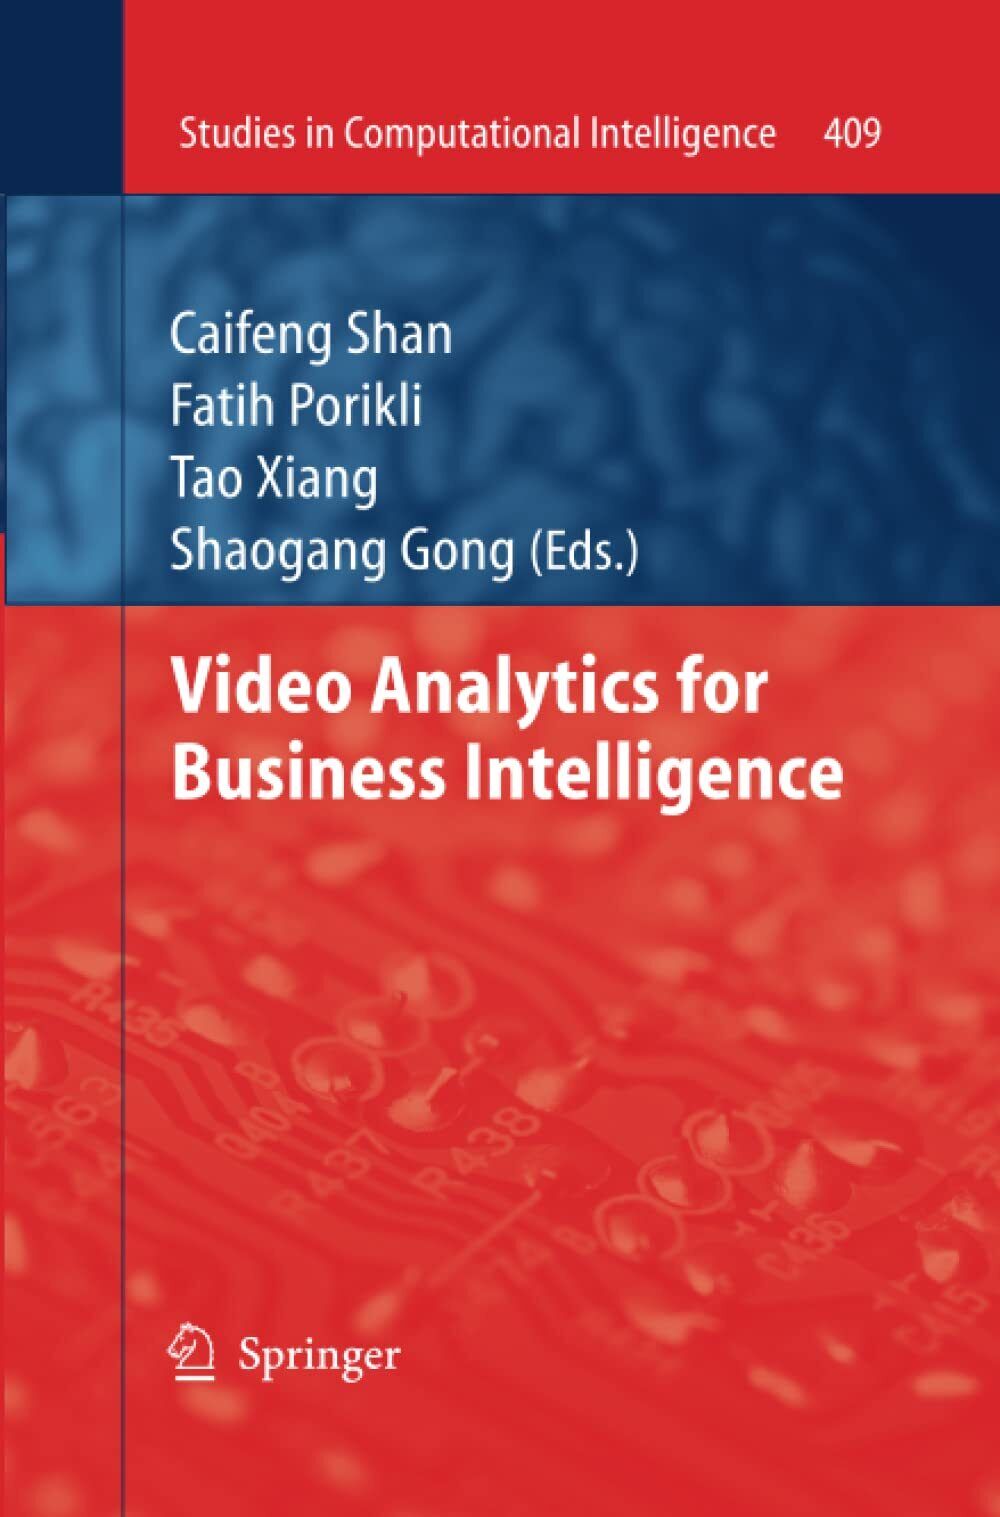 Video Analytics for Business Intelligence - Caifeng Shan - Springer, 2016